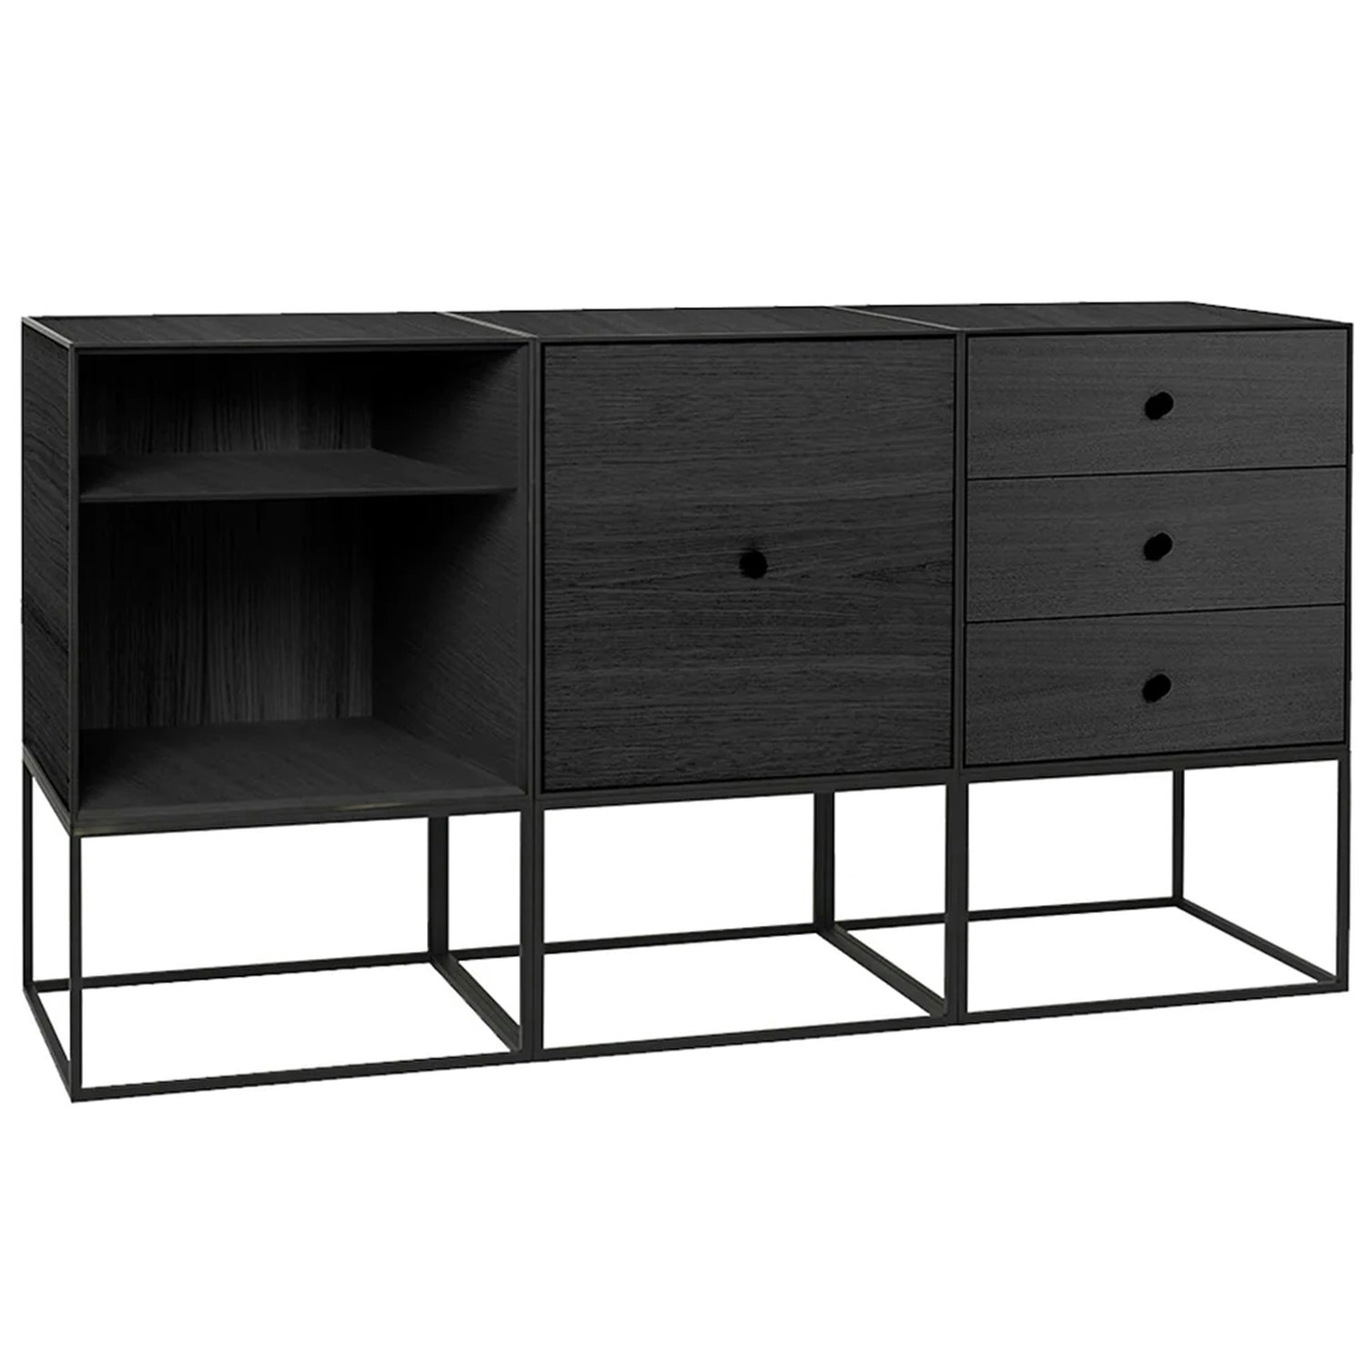 Frame 49 Trio Sideboard With Frame, Black Stained Ash